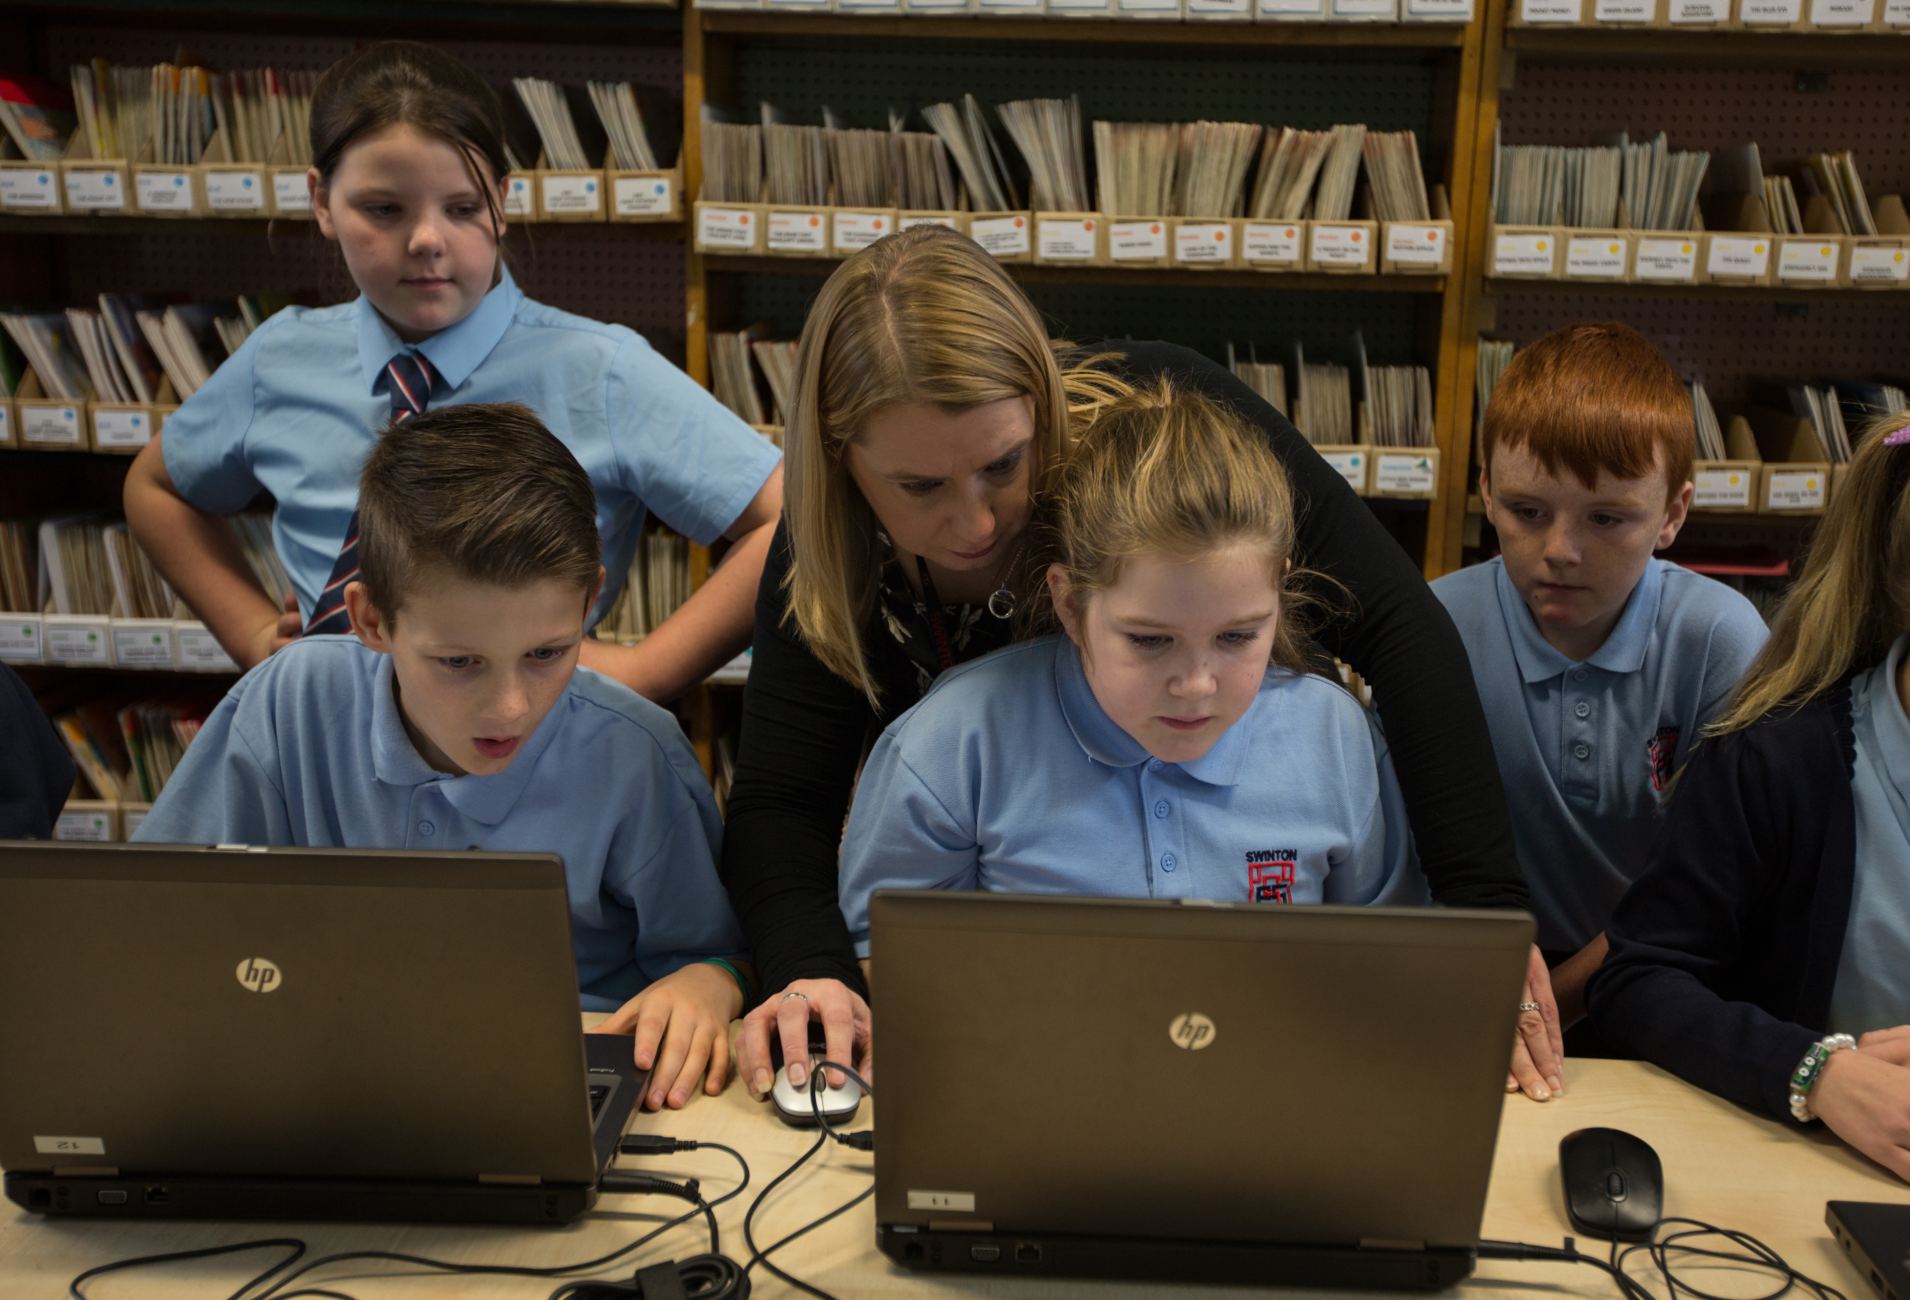 A group of children looking at the screens of two laptops with a woman supervising.